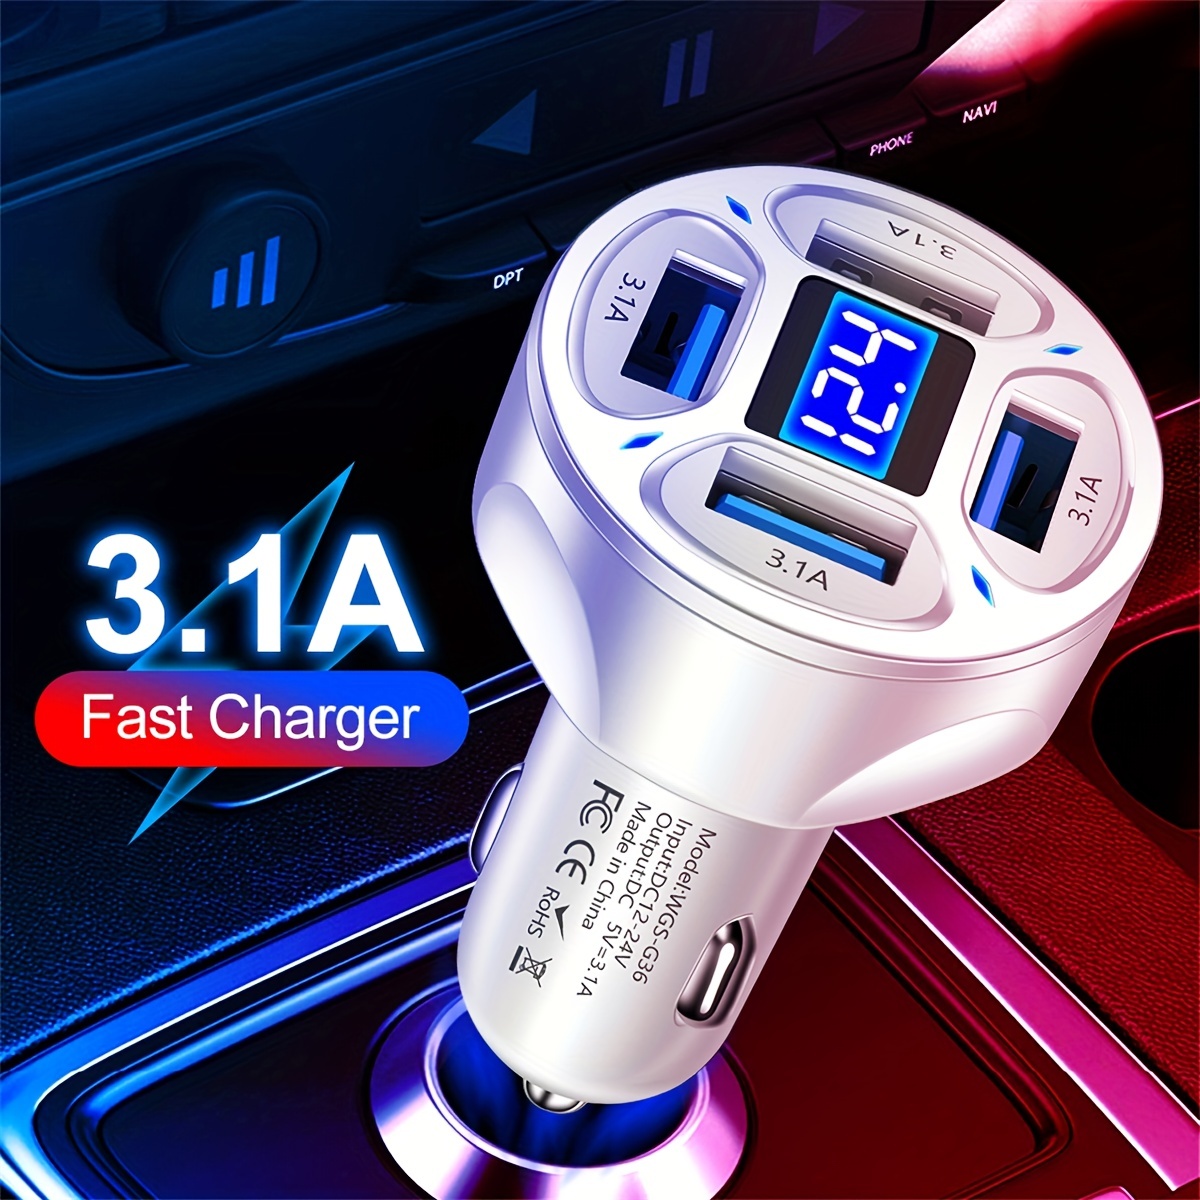 

4 Usb Fast Charging With Voltmeter Led Light Display Adapter 3.1a Super Fast Charging Compatible With 14 13 12 S22 S21 S20 All Smart Phones